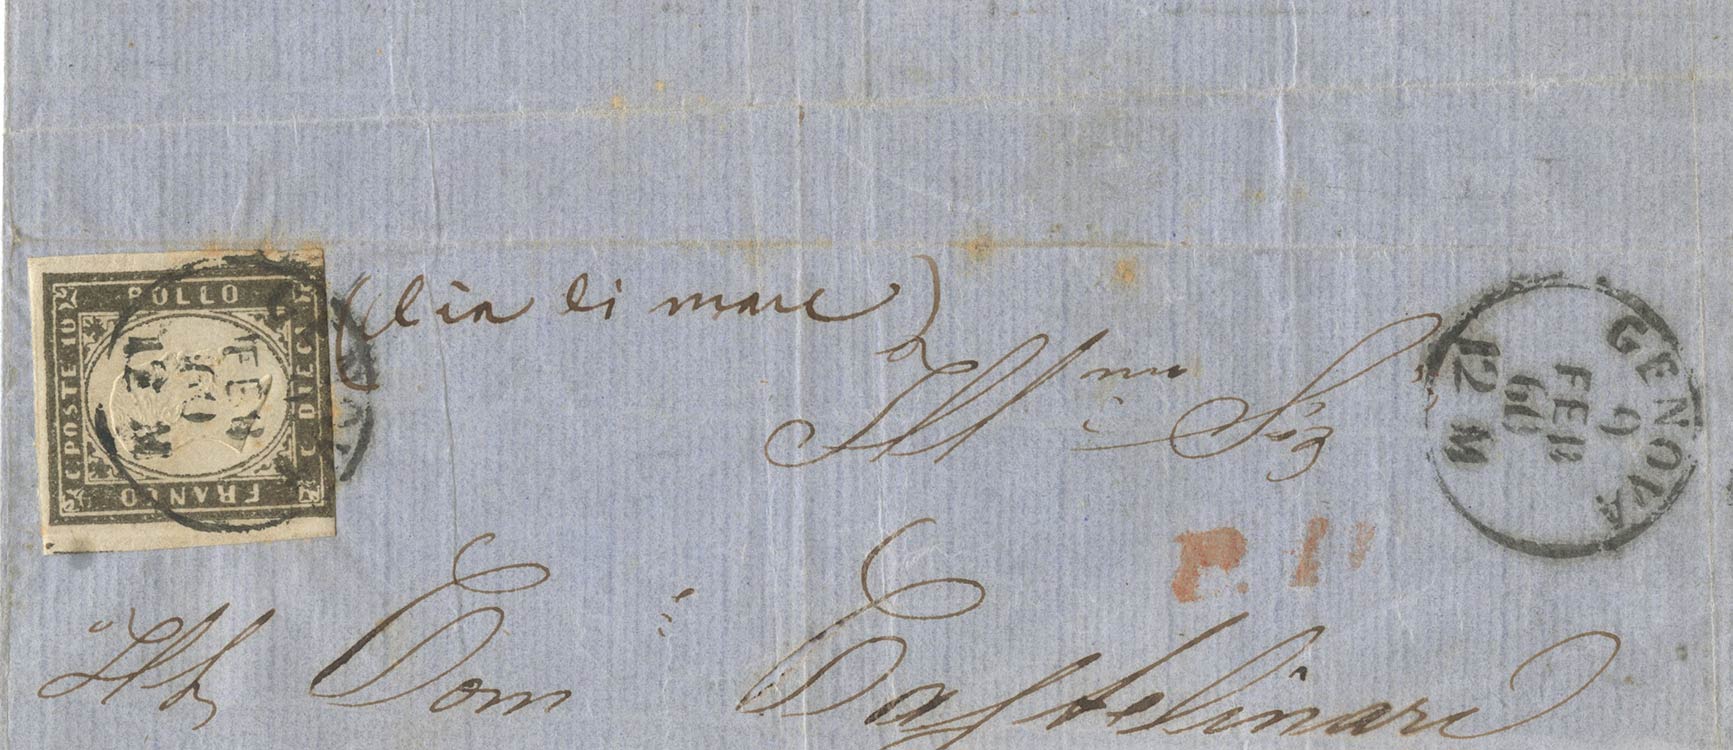 09.02.1860, great fragment from a ... 